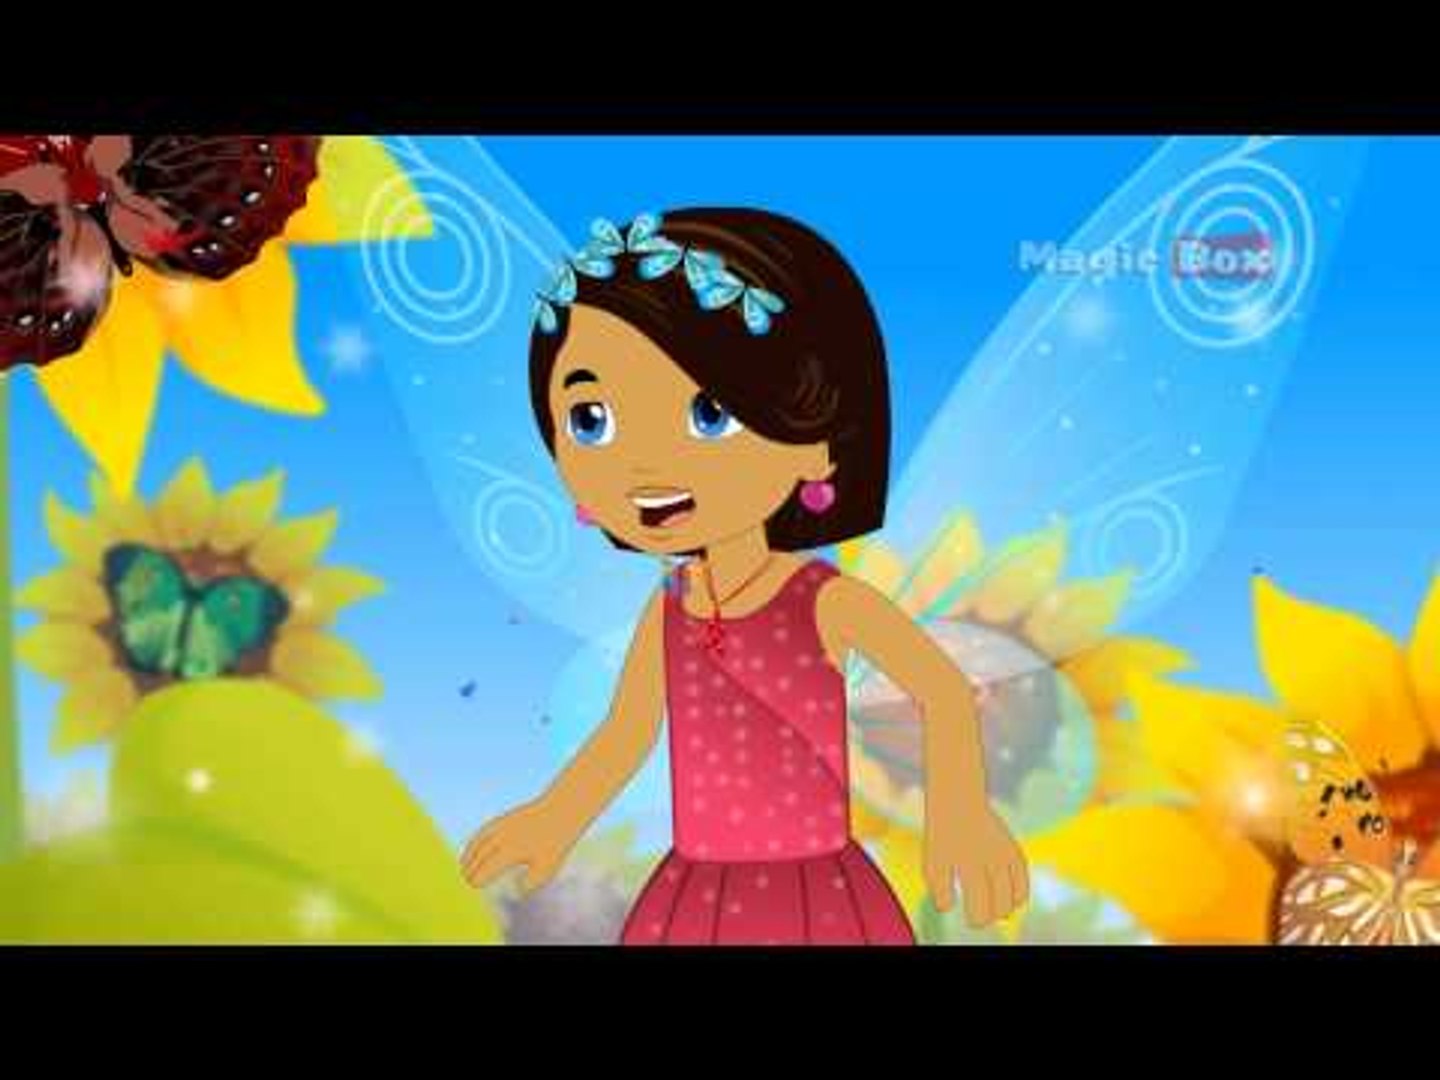 Butterfly - Kingini Chellam - Pre School - Animated/Cartoon Rhymes For Kids  - video Dailymotion